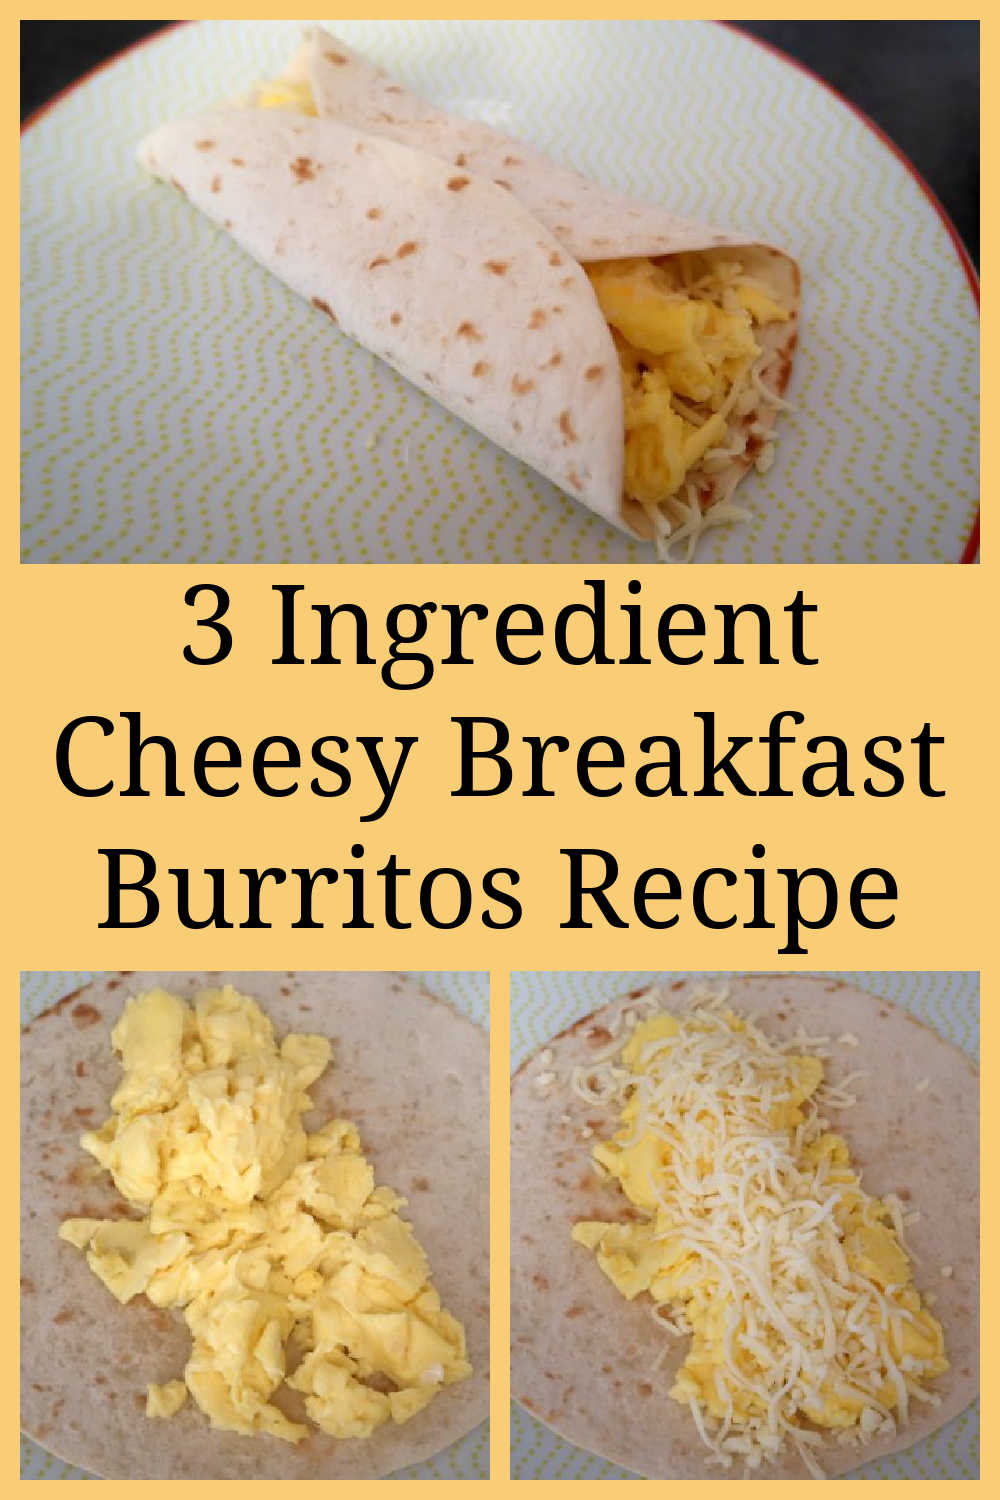 Easy Breakfast Burritos Recipe - How to make the best cheap budget friendly burrito breakfast that you can make ahead. With the video tutorial for how to cook the cheesy 3 ingredient burrito.